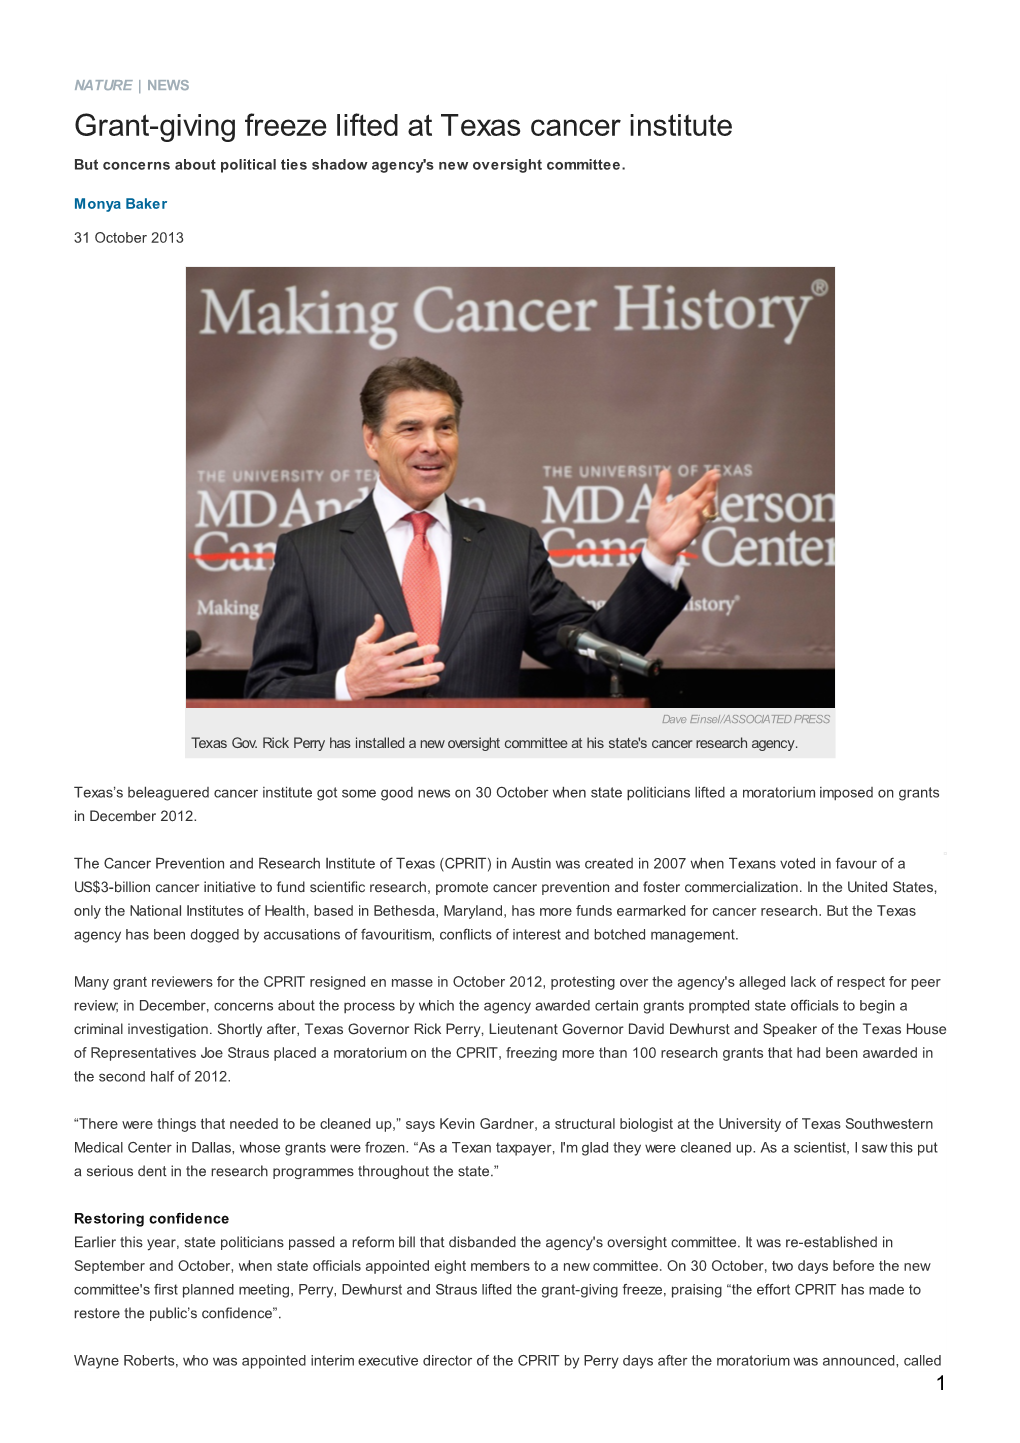 Grant-Giving Freeze Lifted at Texas Cancer Institute but Concerns About Political Ties Shadow Agency's New Oversight Committee